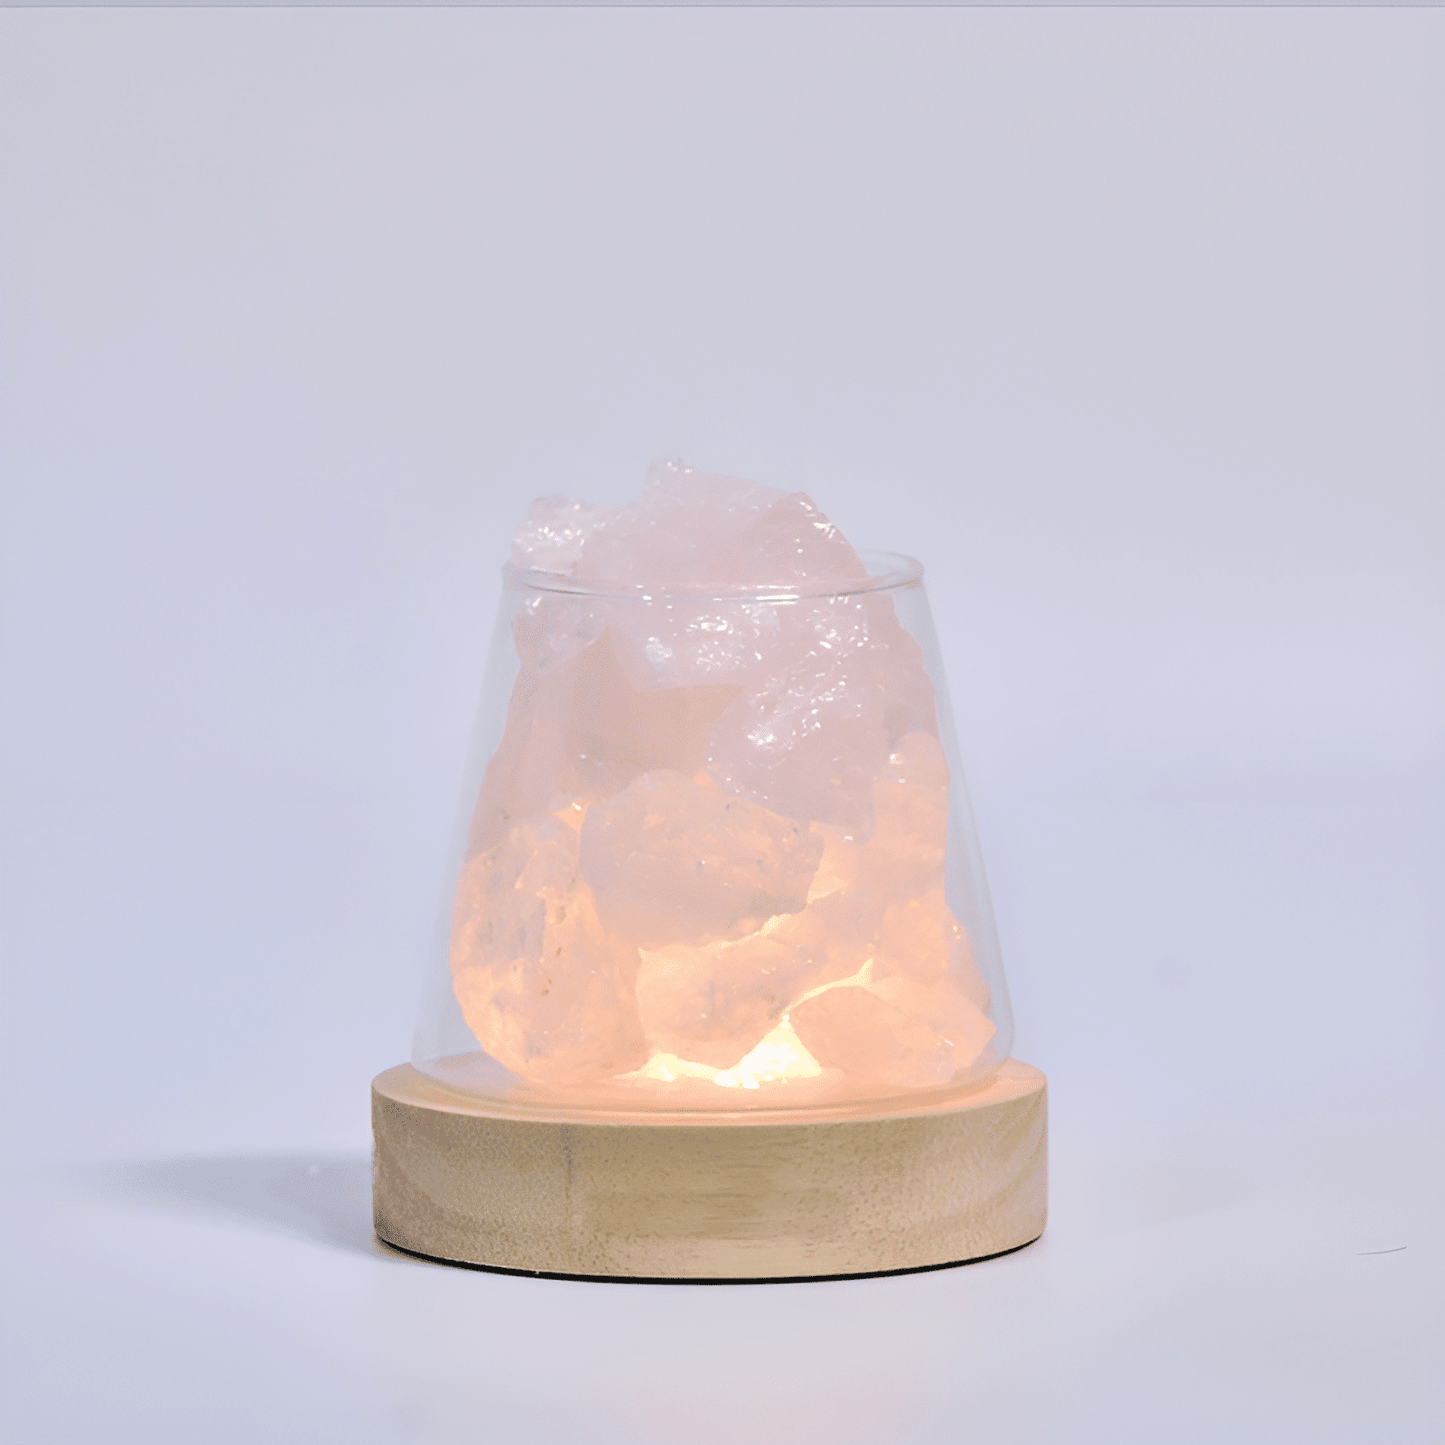 Crystal Healing Rose Quartz Crystal Aromatherapy Oil Attraction Diffuser